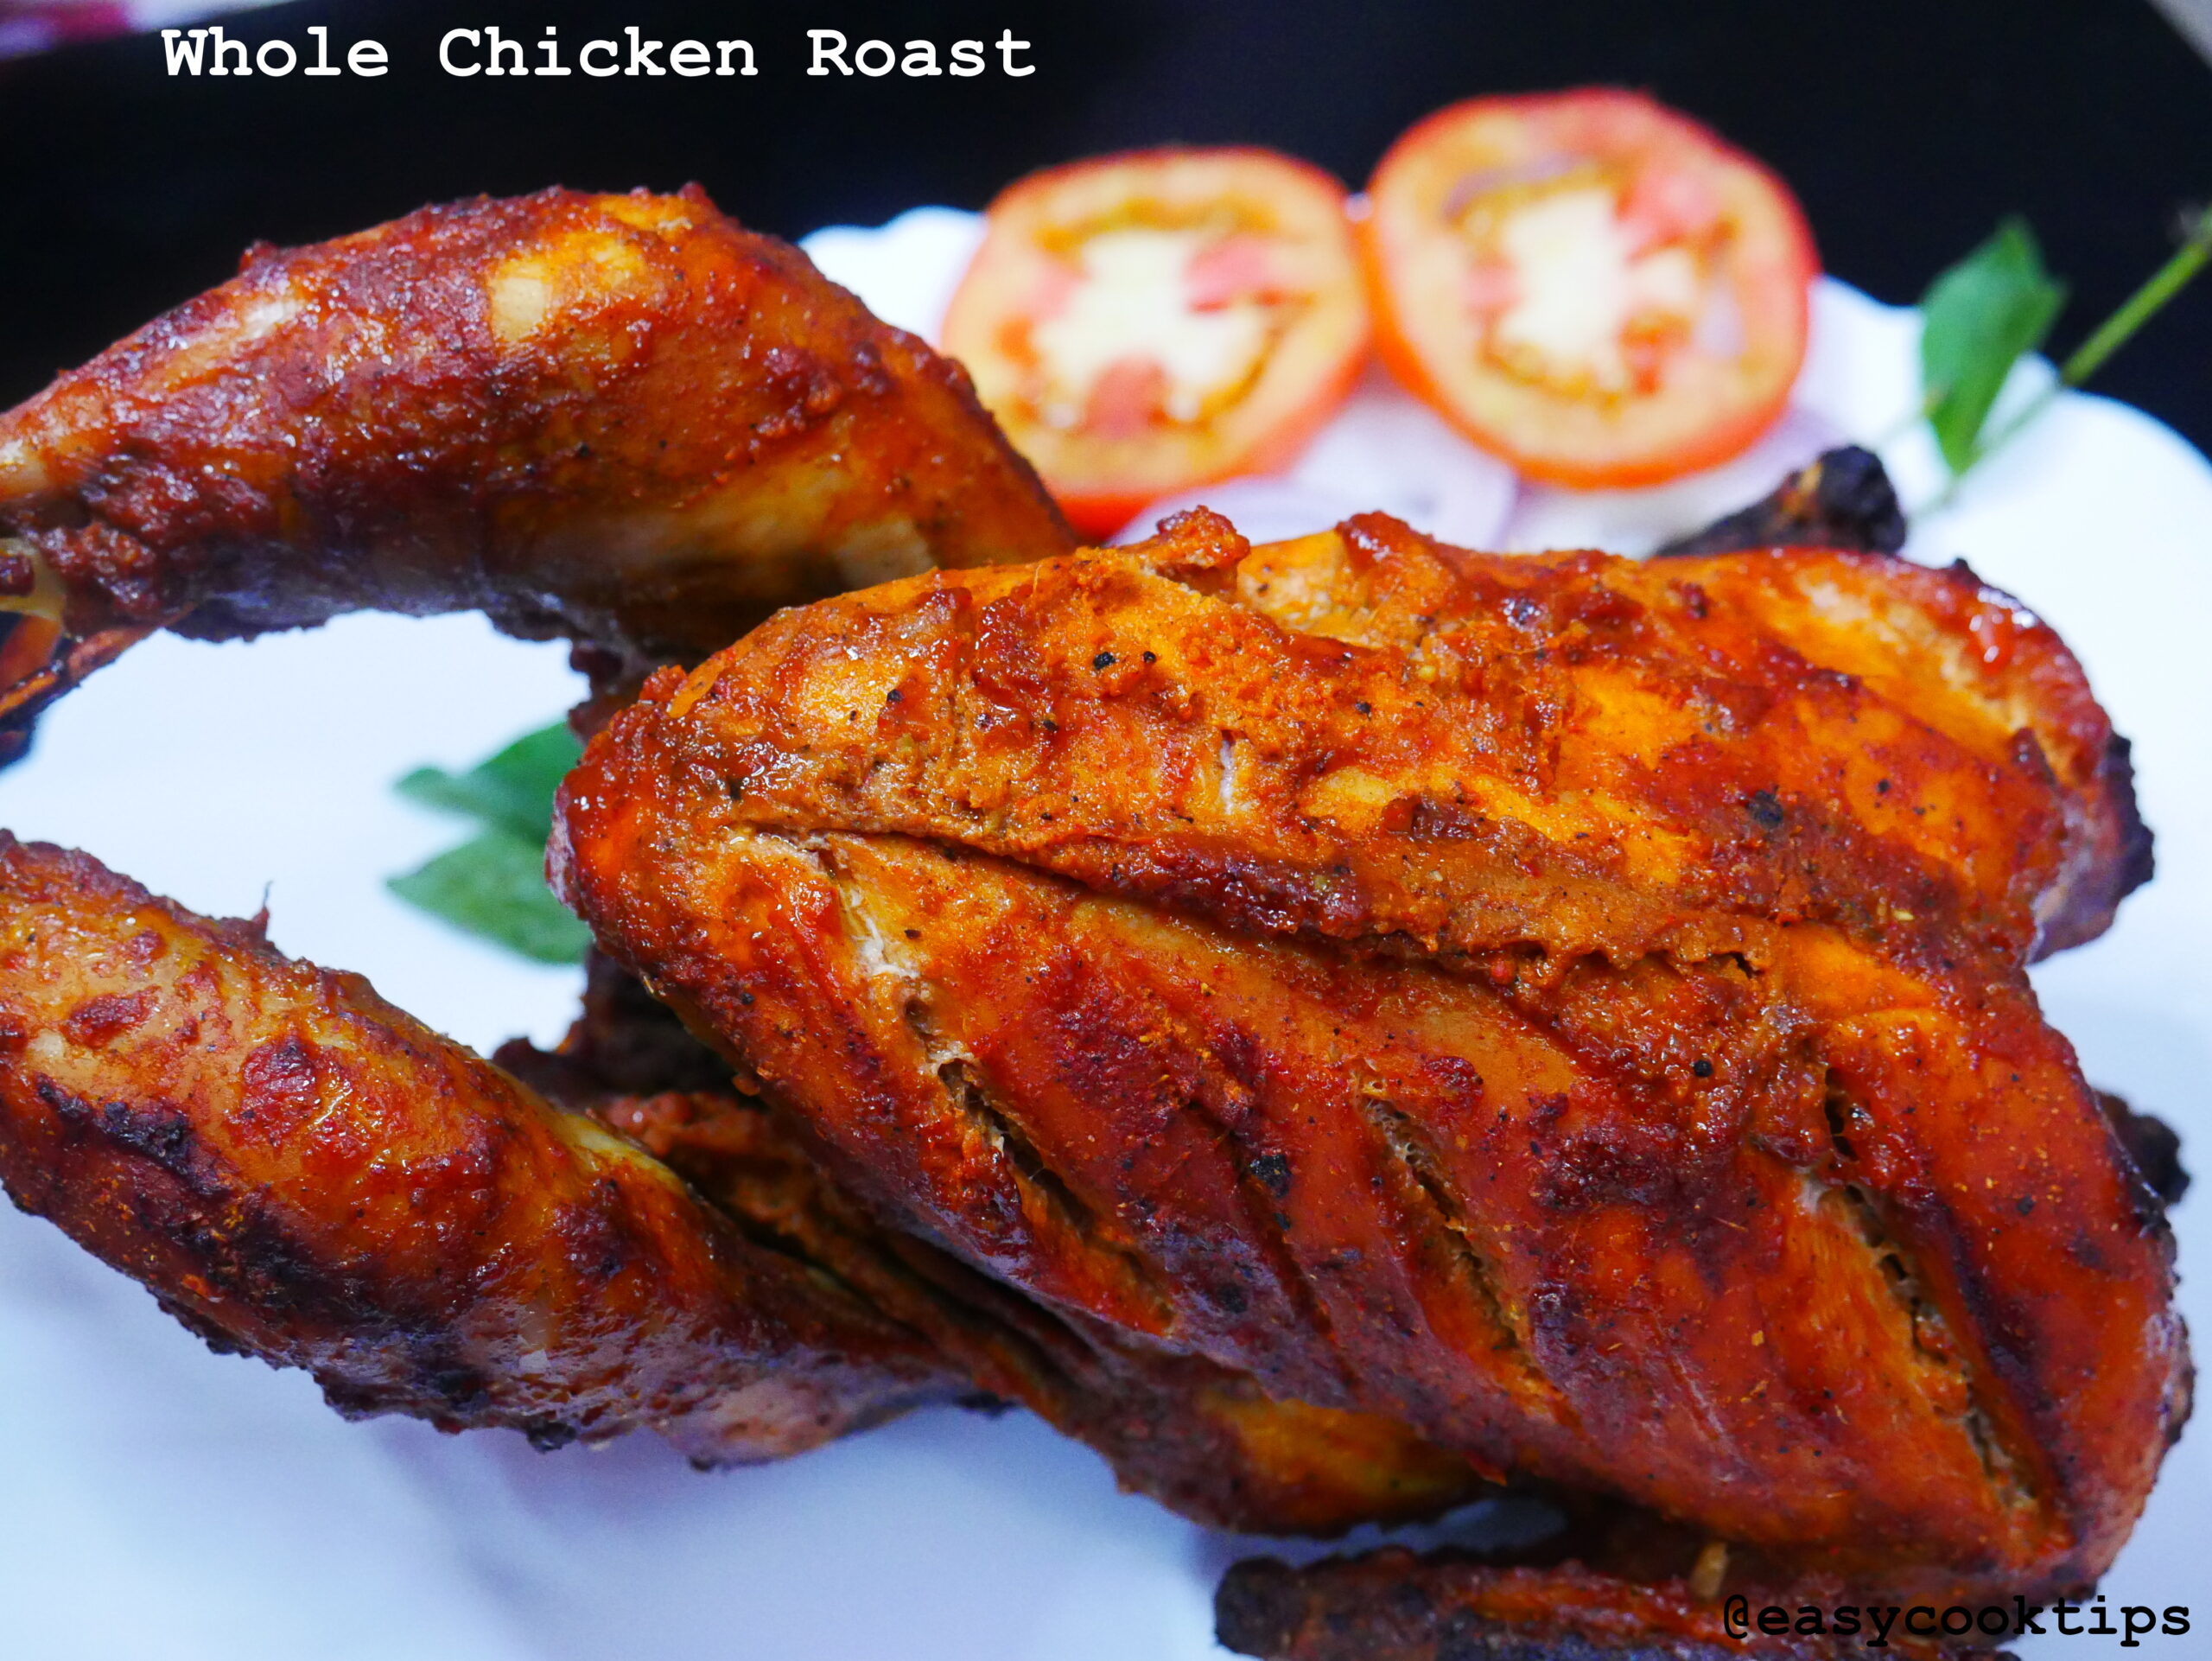 Whole Chicken Roast Recipe|Indian Style Whole Roasted Chicken Recipe in Philips OTG Oven